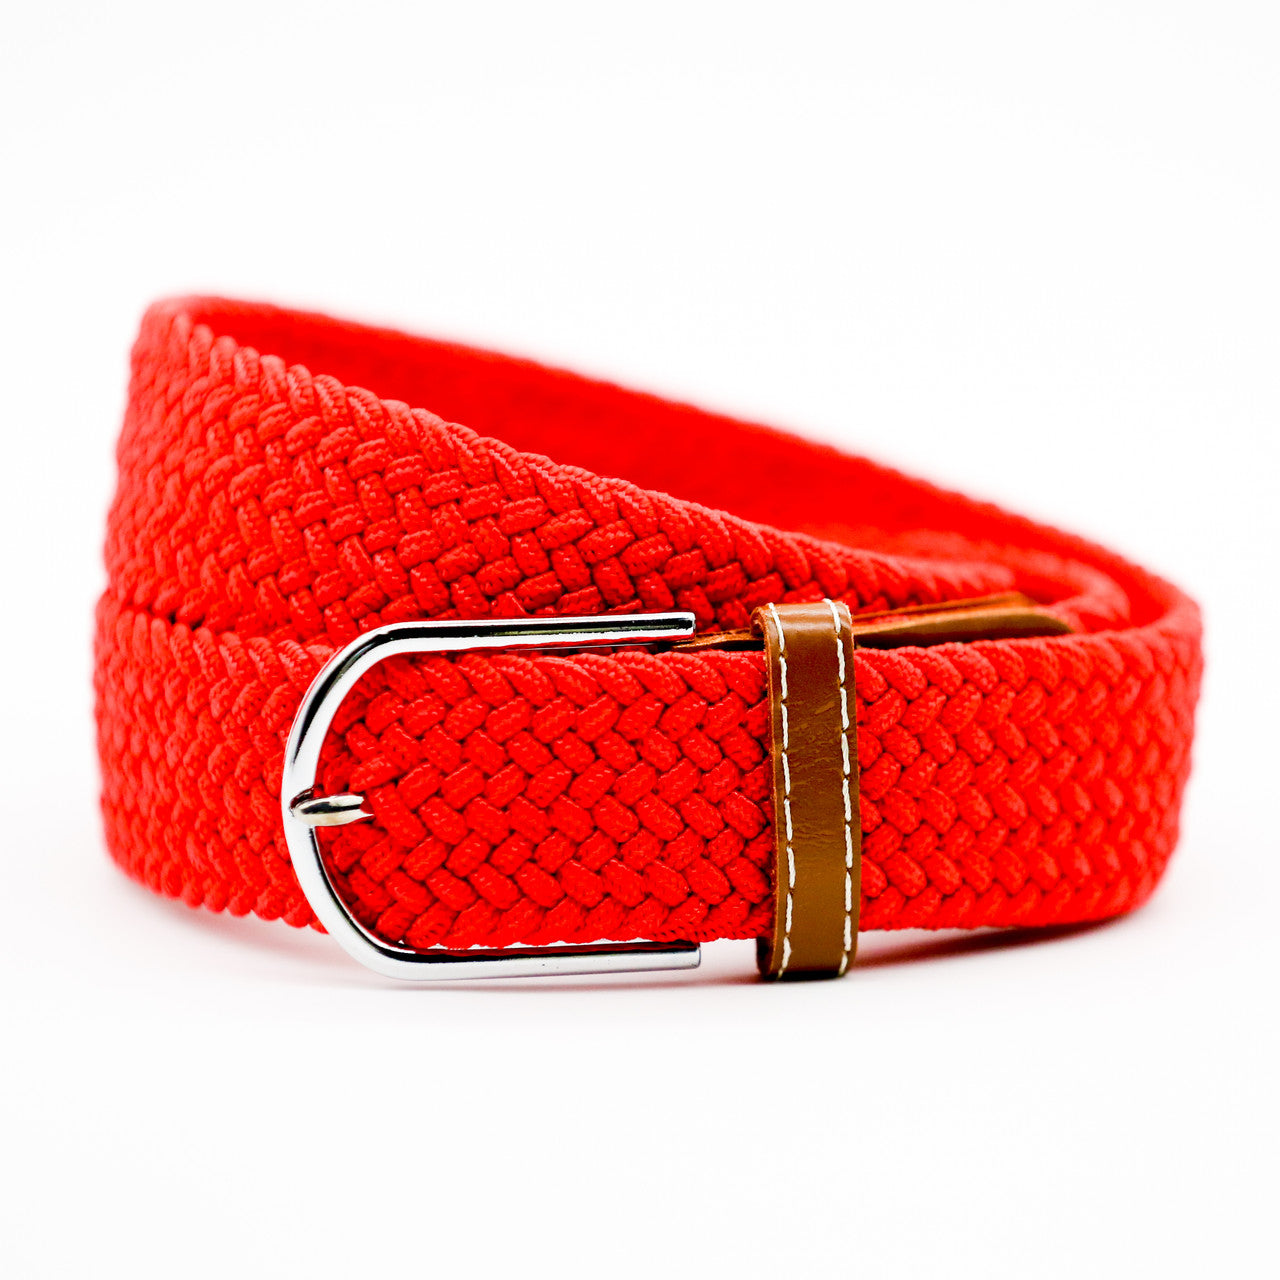 Belt - Red with Tan Ends THIN